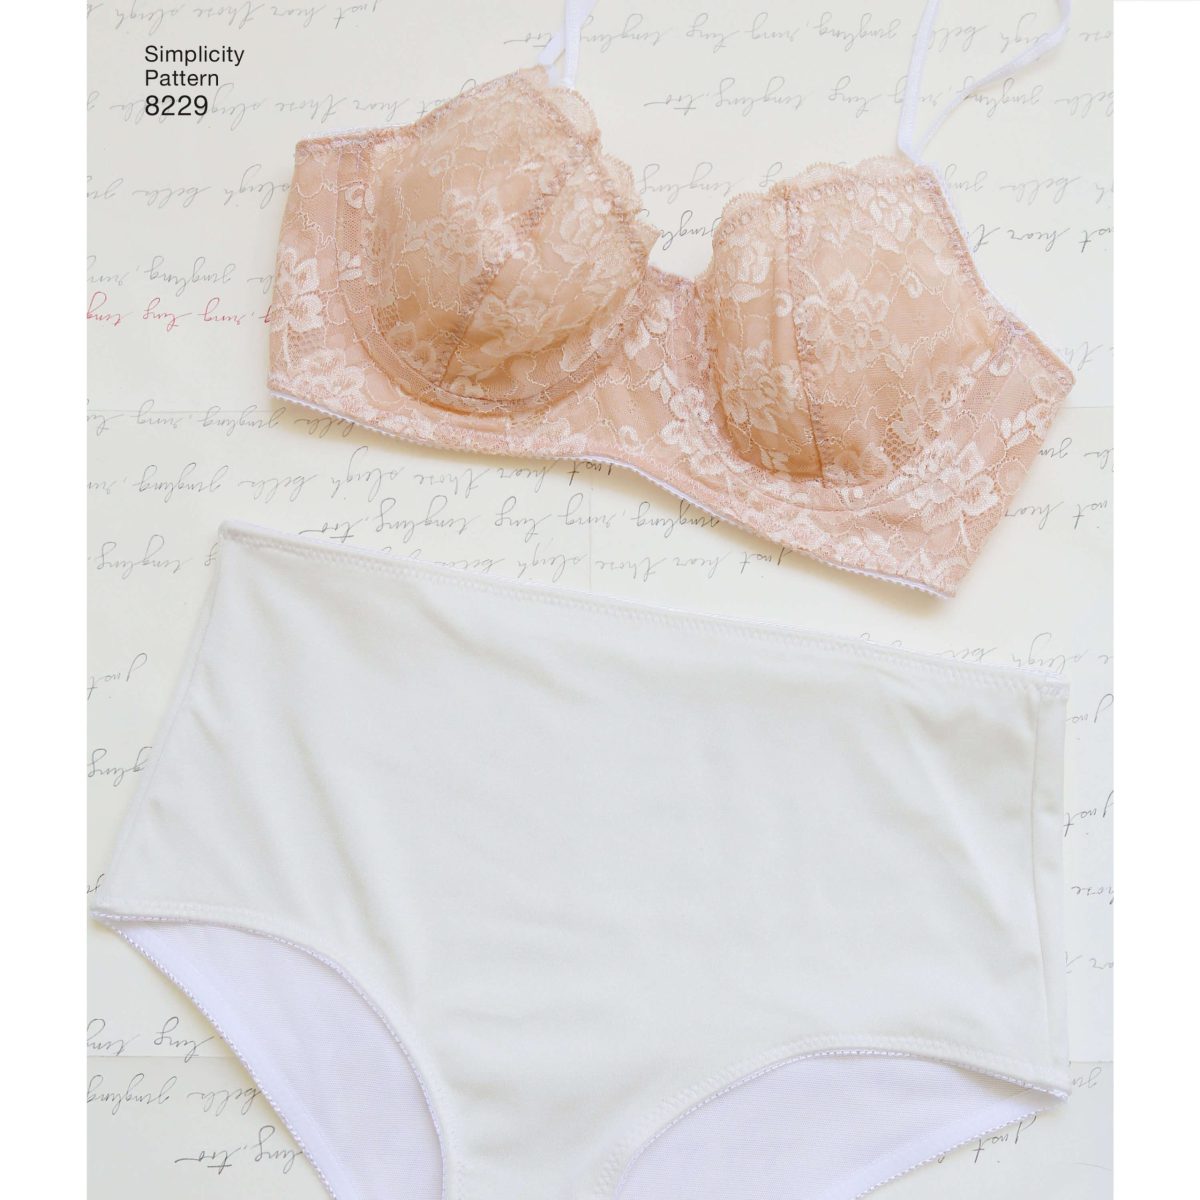 Simplicity Pattern 8229 Misses' Underwire Bras and Panties - Sewdirect